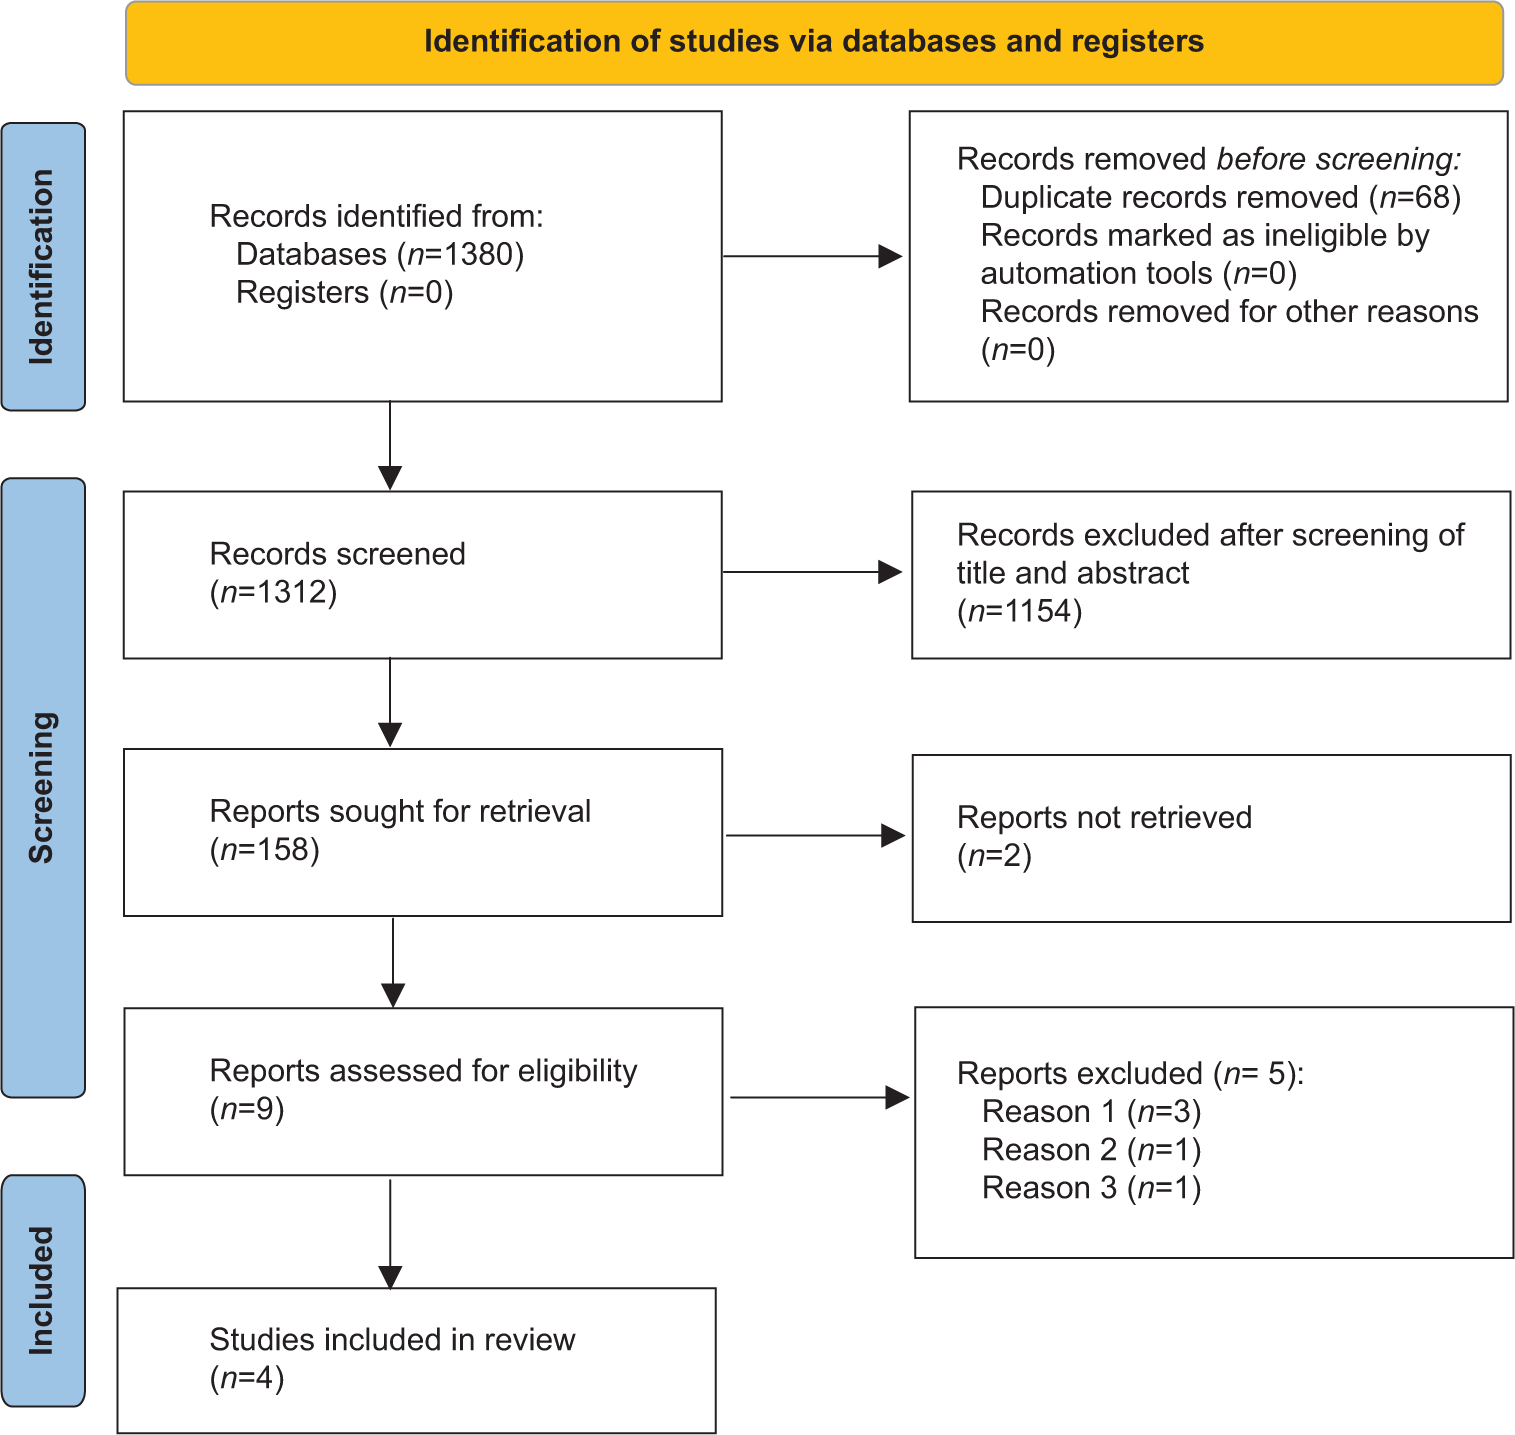 Flowchart elaborating on study retrieval and inclusion in the meta-analysis.